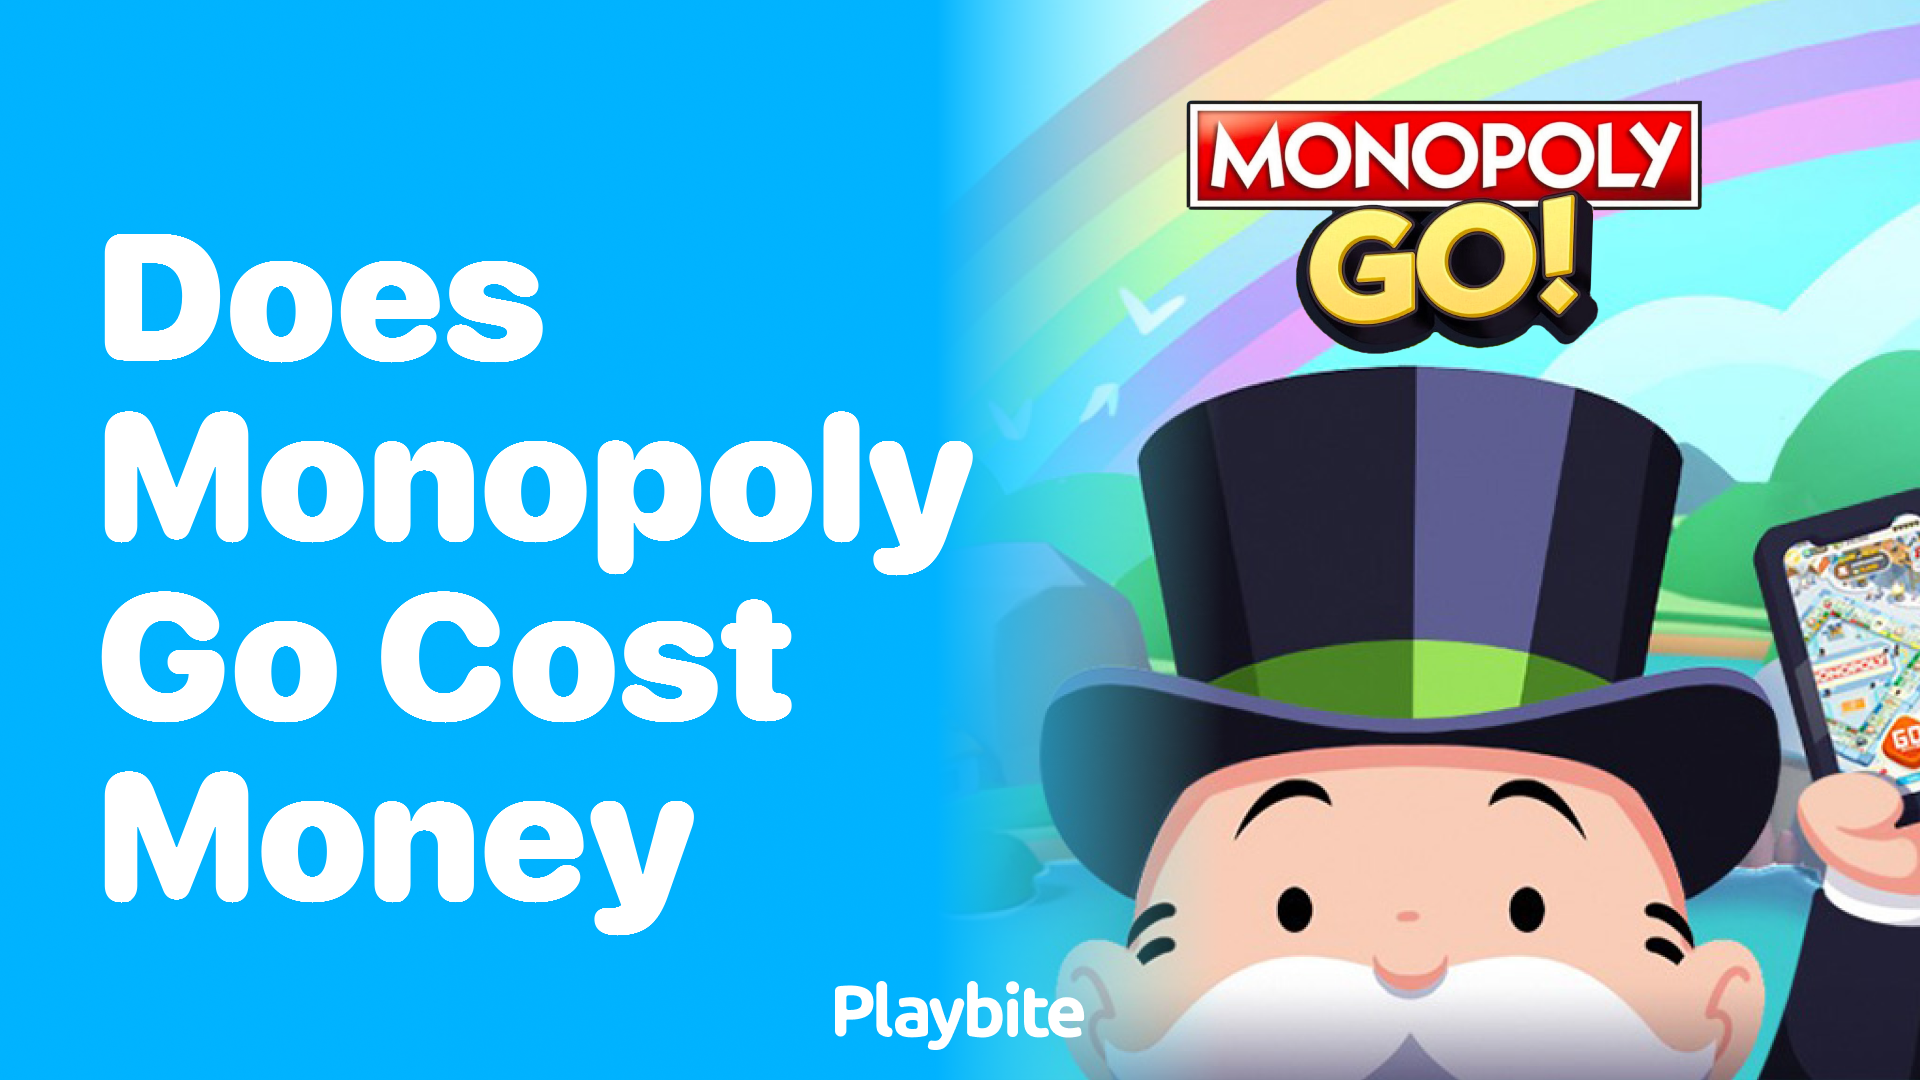 Does Monopoly Go Cost Money? Find Out Here!